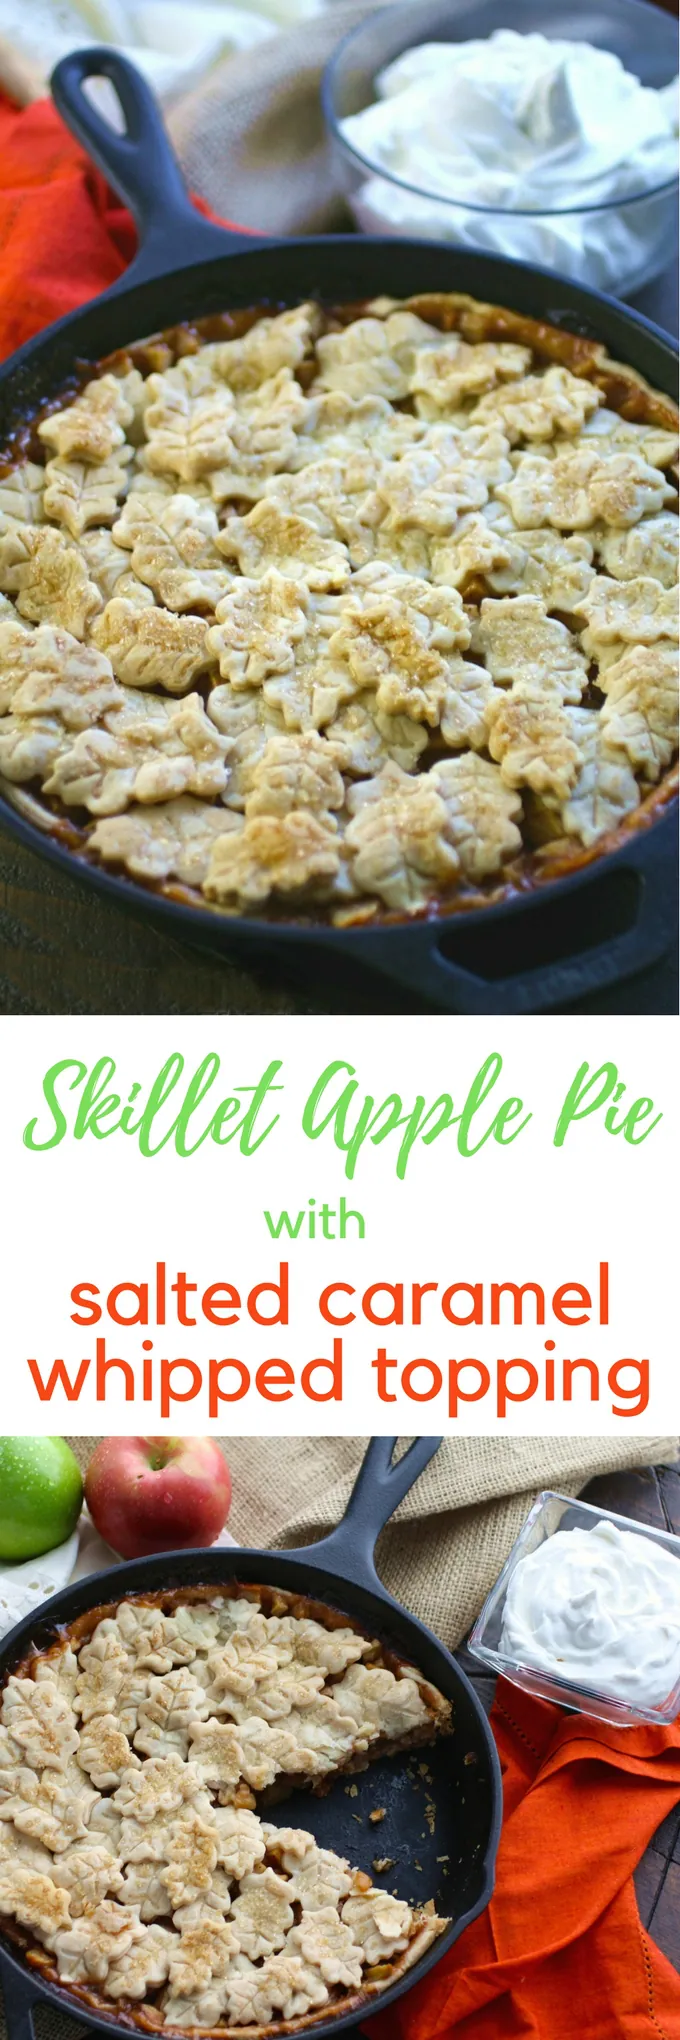 Skillet Apple Pie with Salted Caramel Whipped Topping is the perfect fall dessert. You'll love this pie for its flavor and fun!